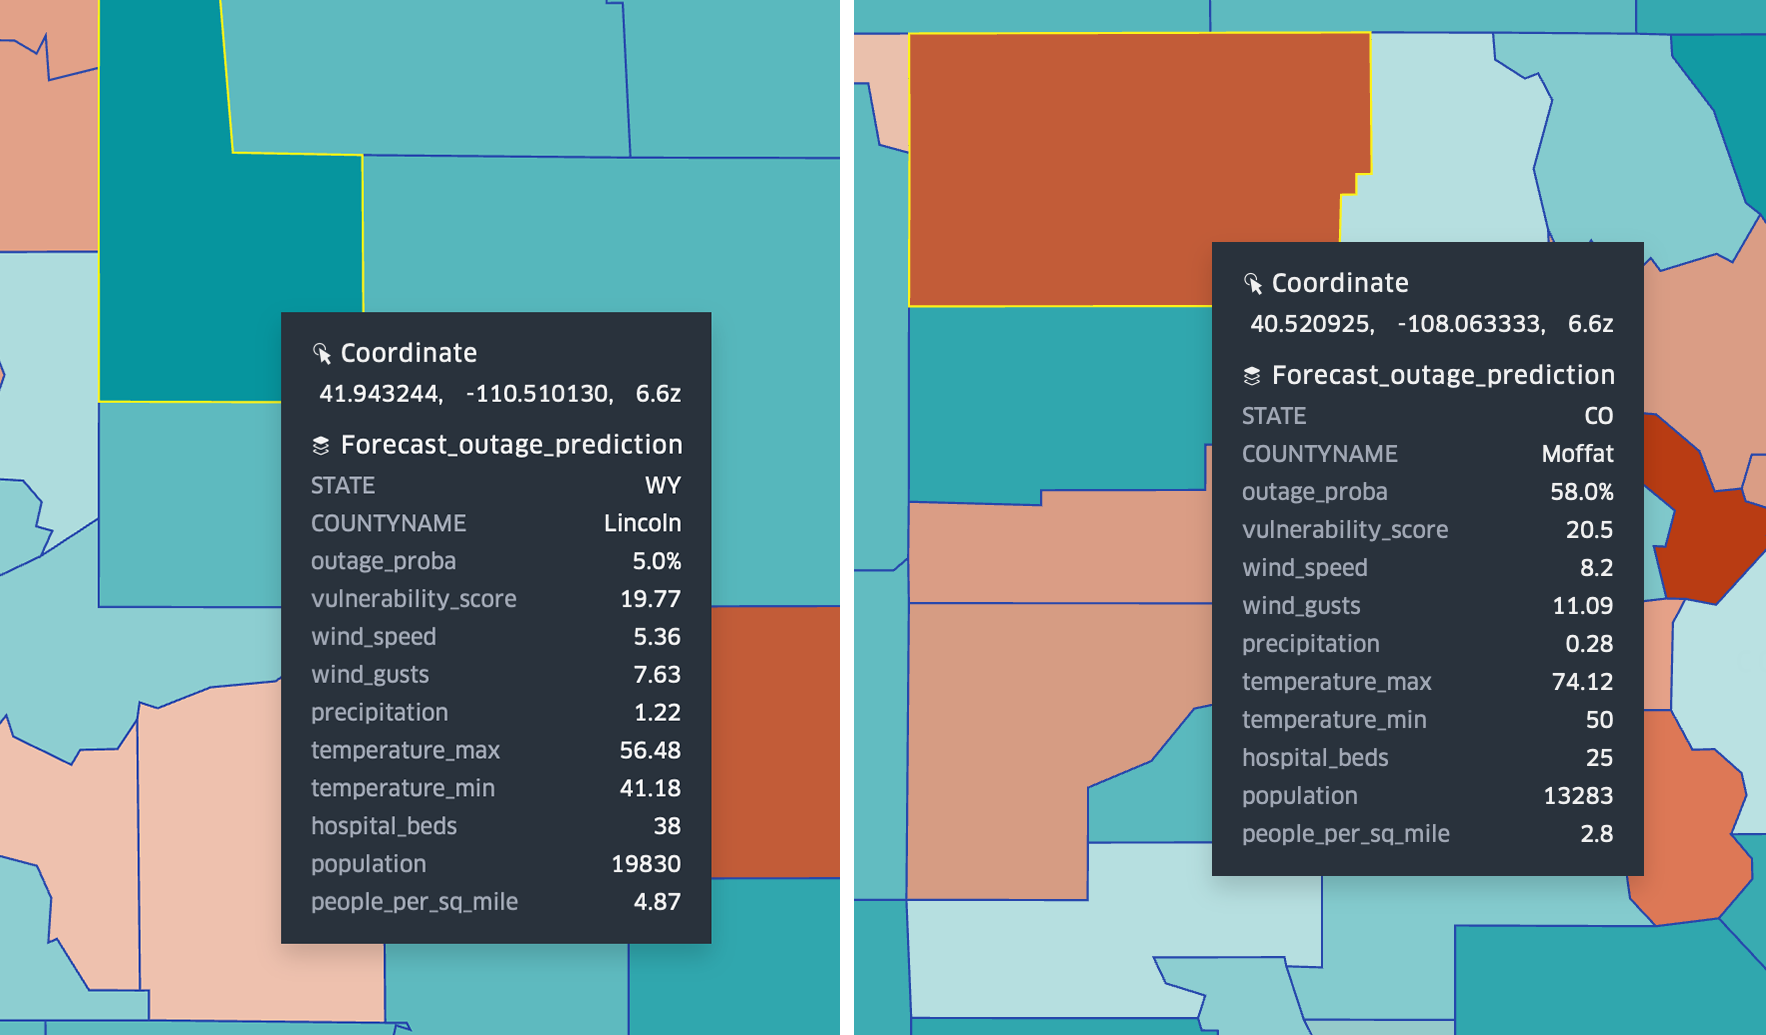 side-by-side view of two counties with two different colors showing a difference in probablility